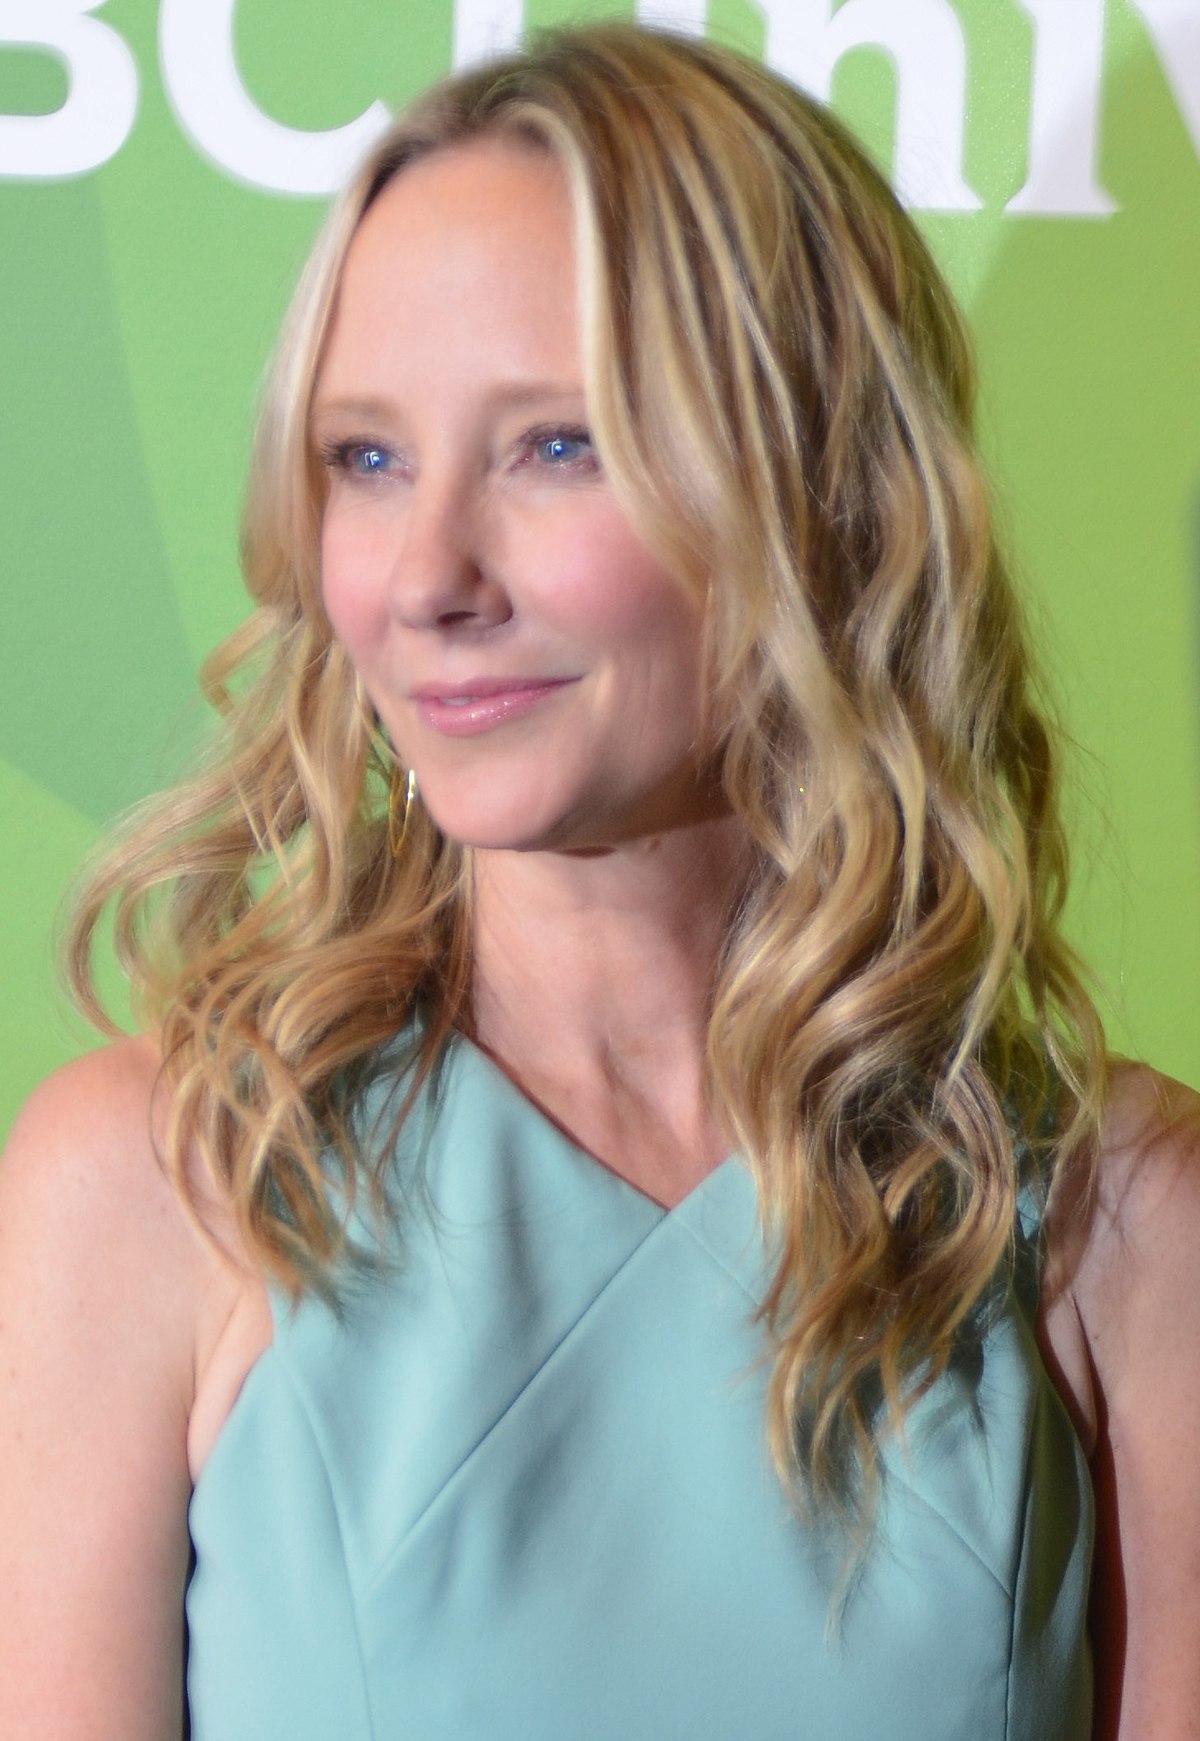 Is heche now dating anne who Anne Heche's